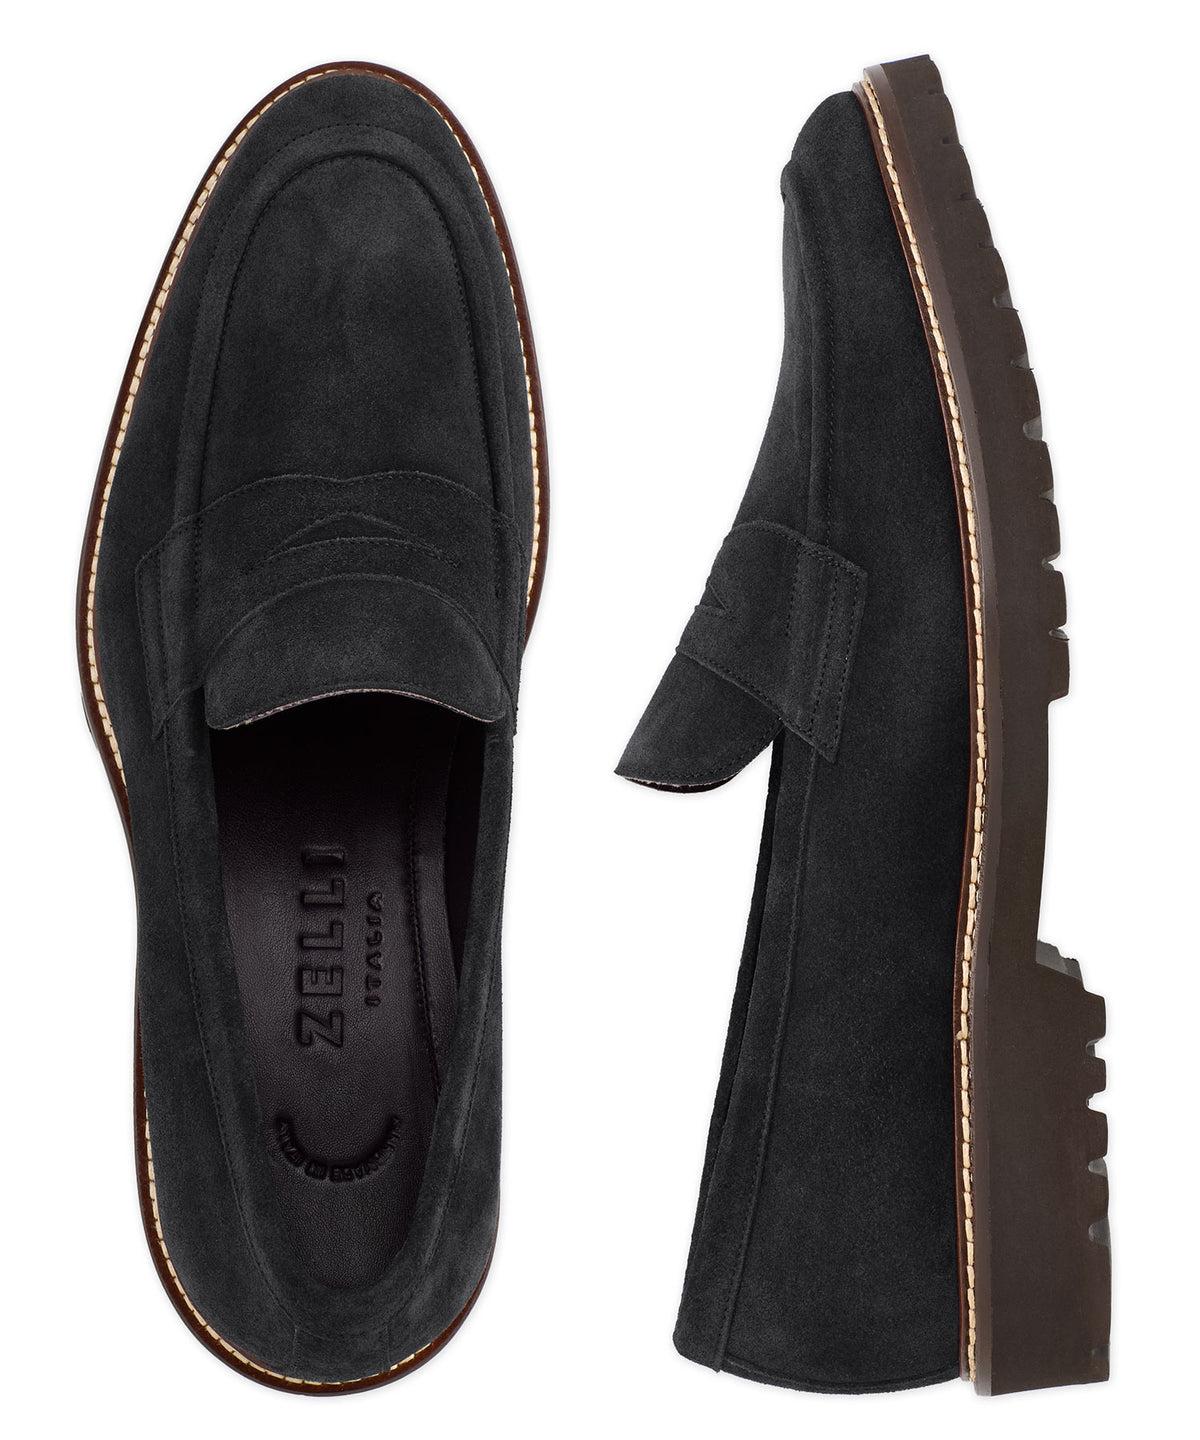 ROMA Countryside Suede Lug Sole Loafer